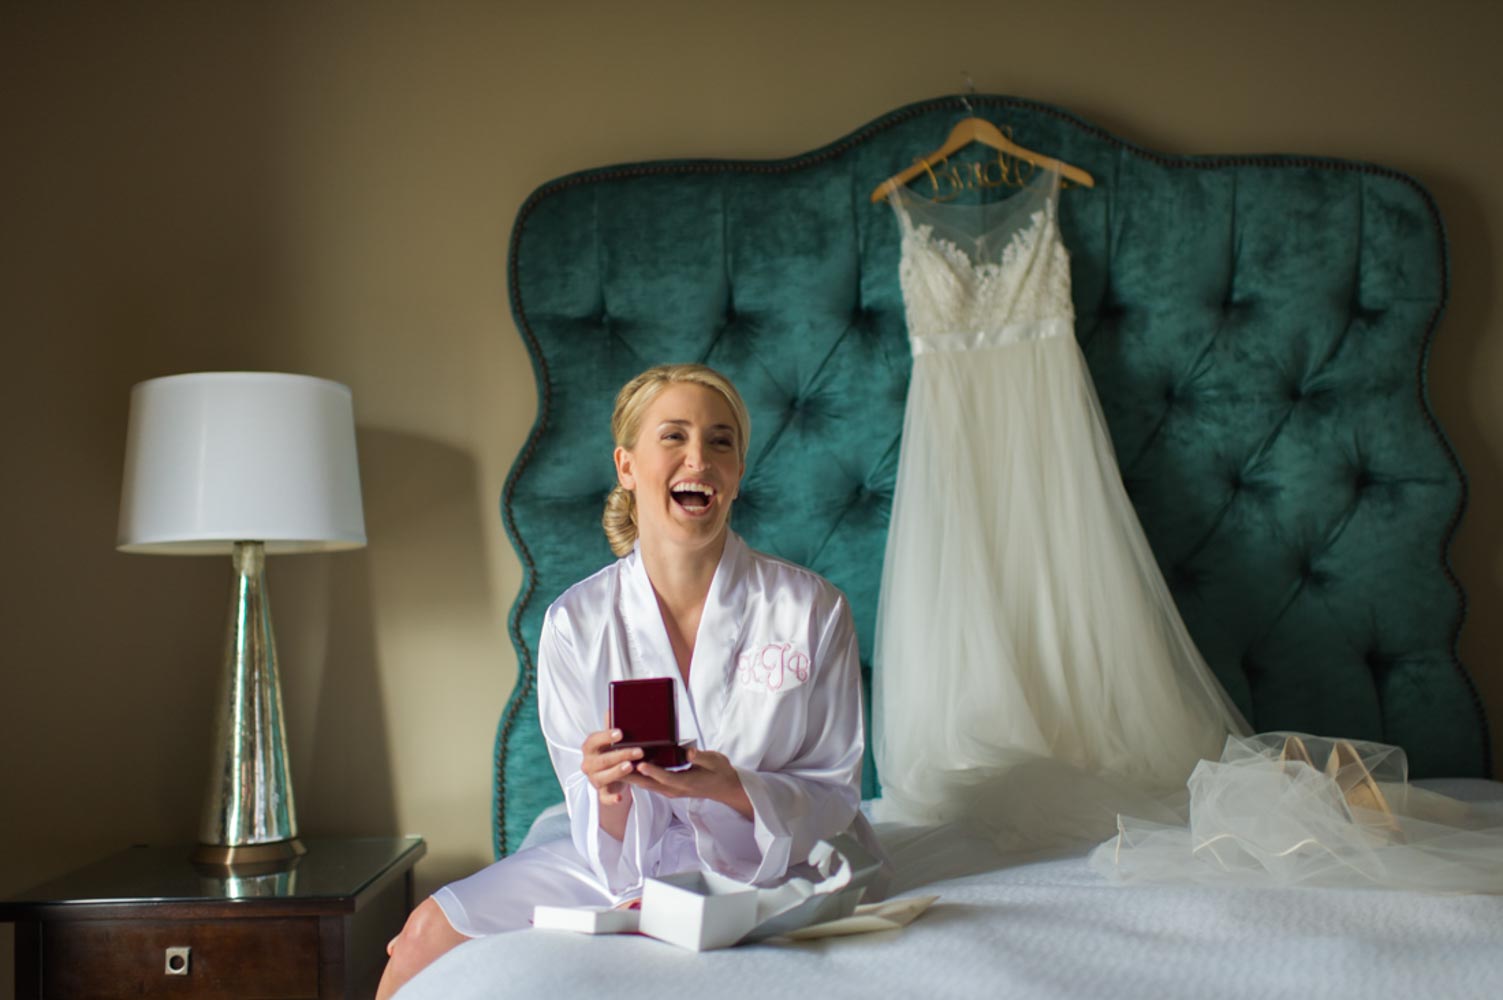 bride laughing after getting a gift from groom